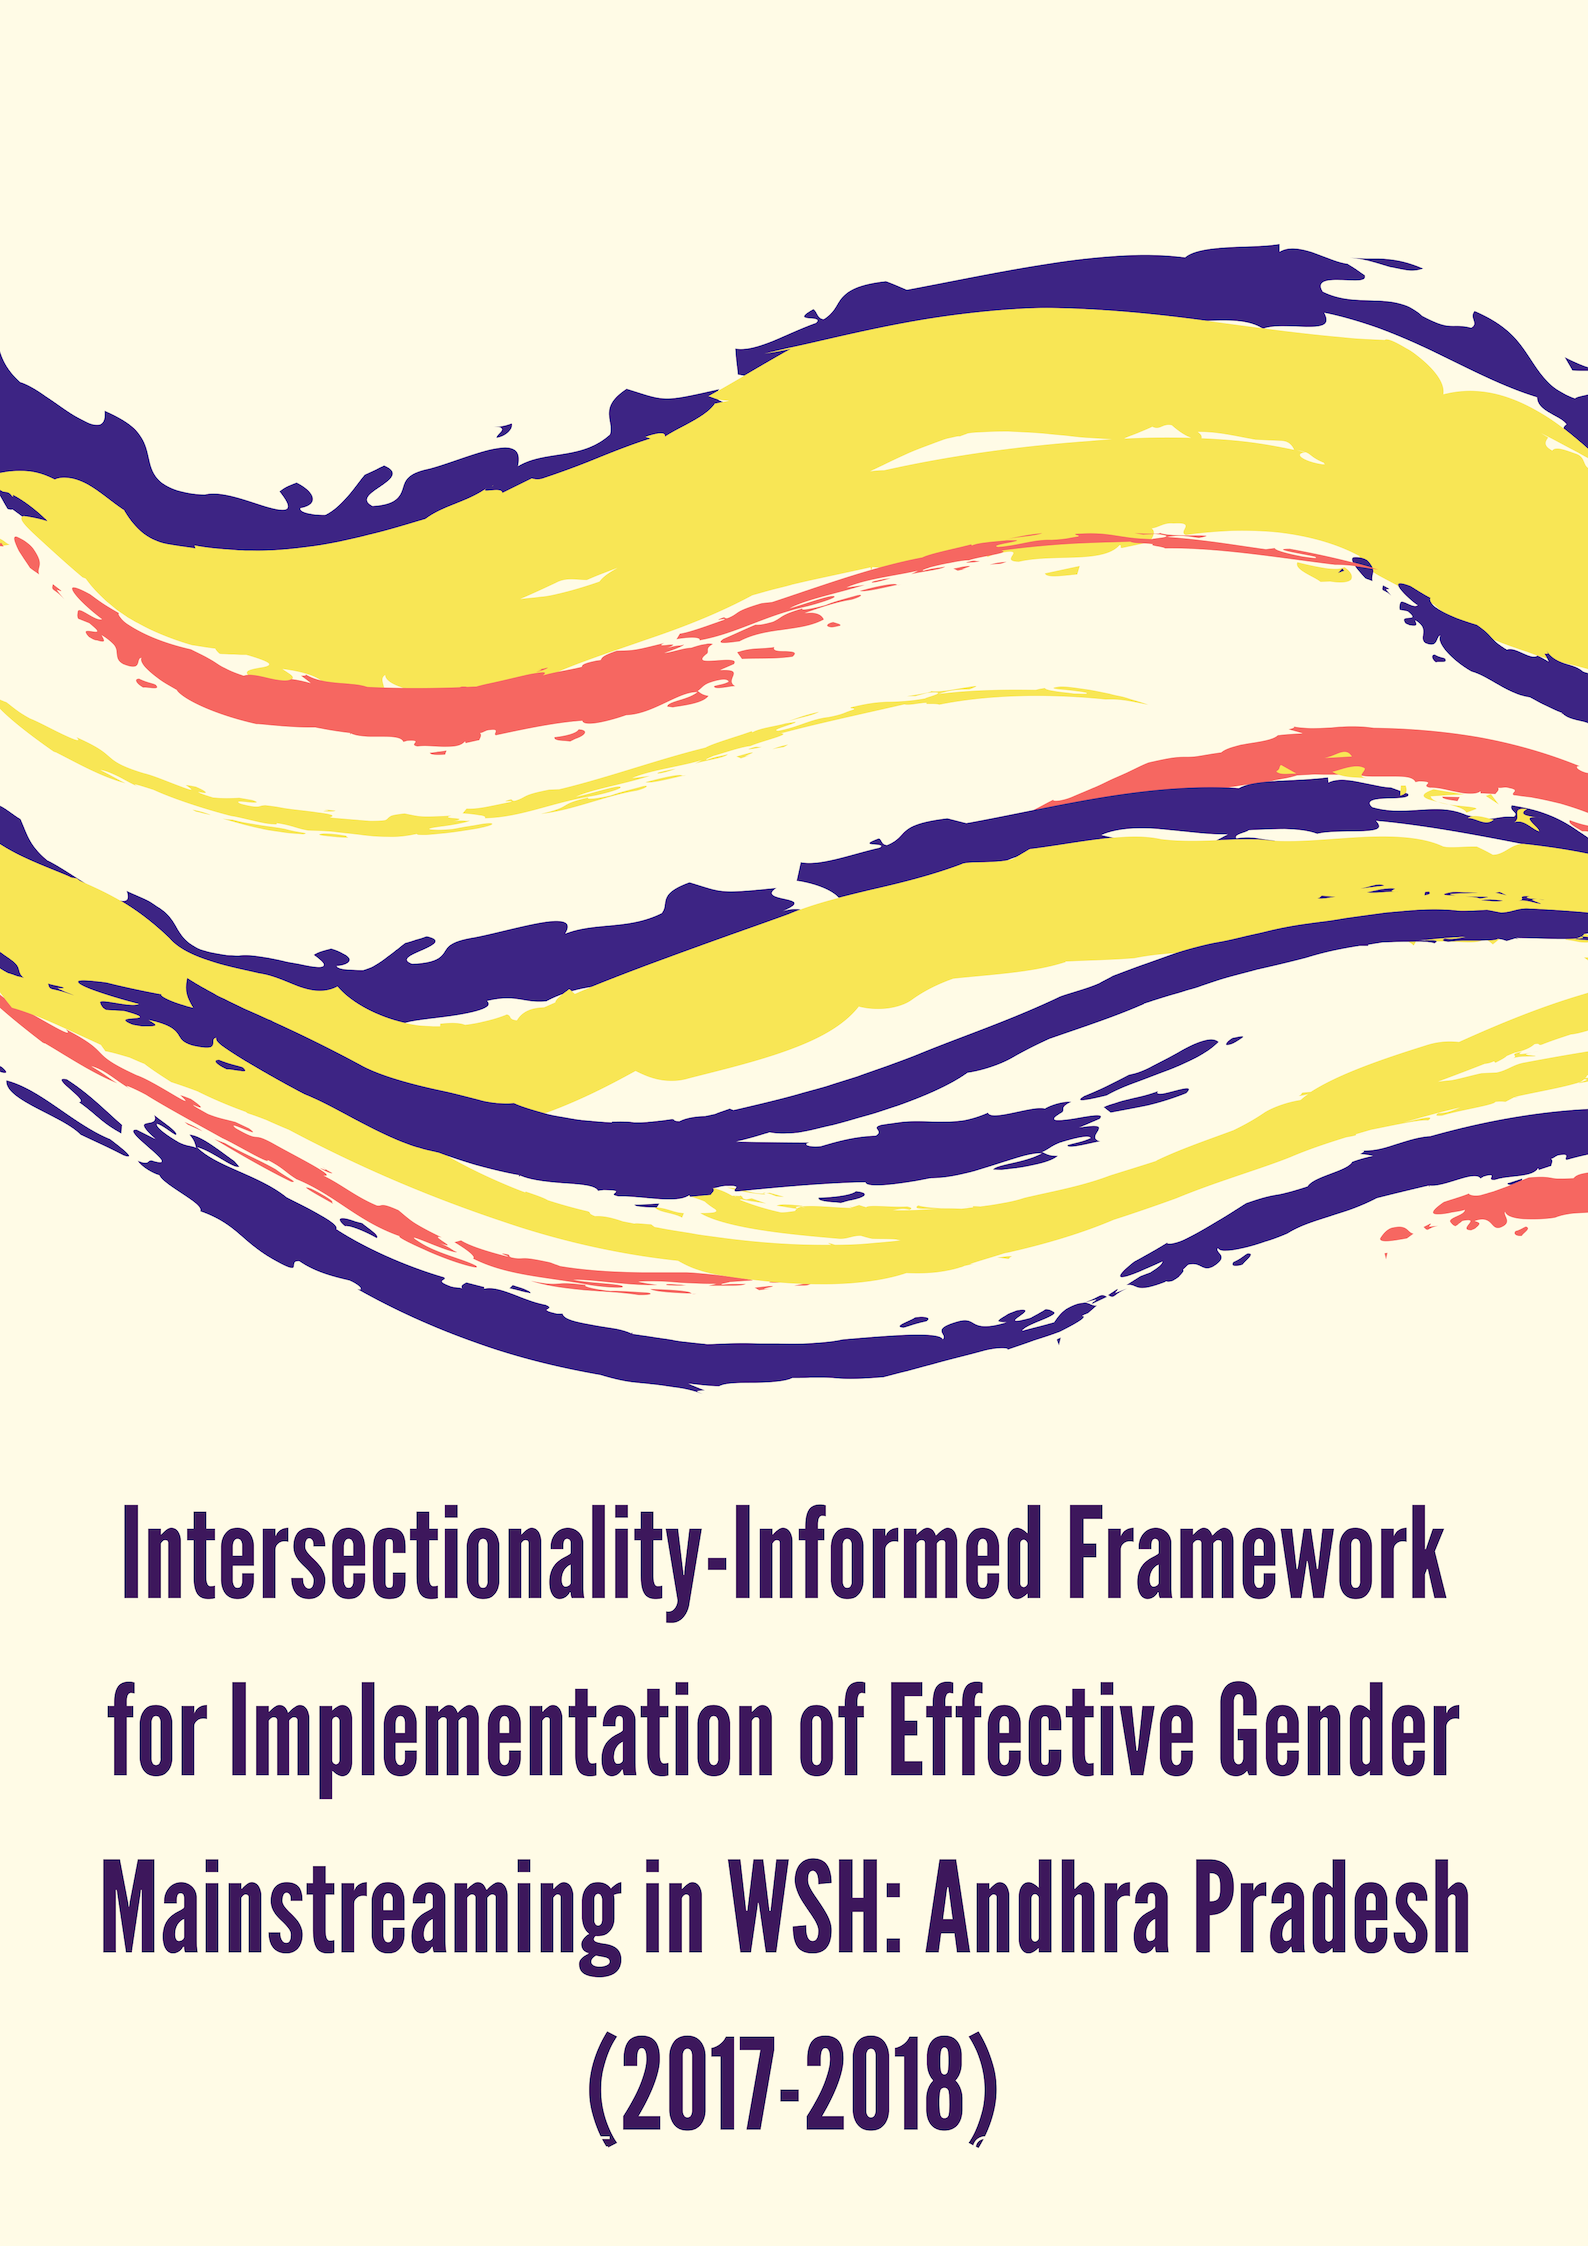 Intersectionality-Informed Framework for Implementation of Effective Gender Mainstreaming in WSH: Andhra Pradesh